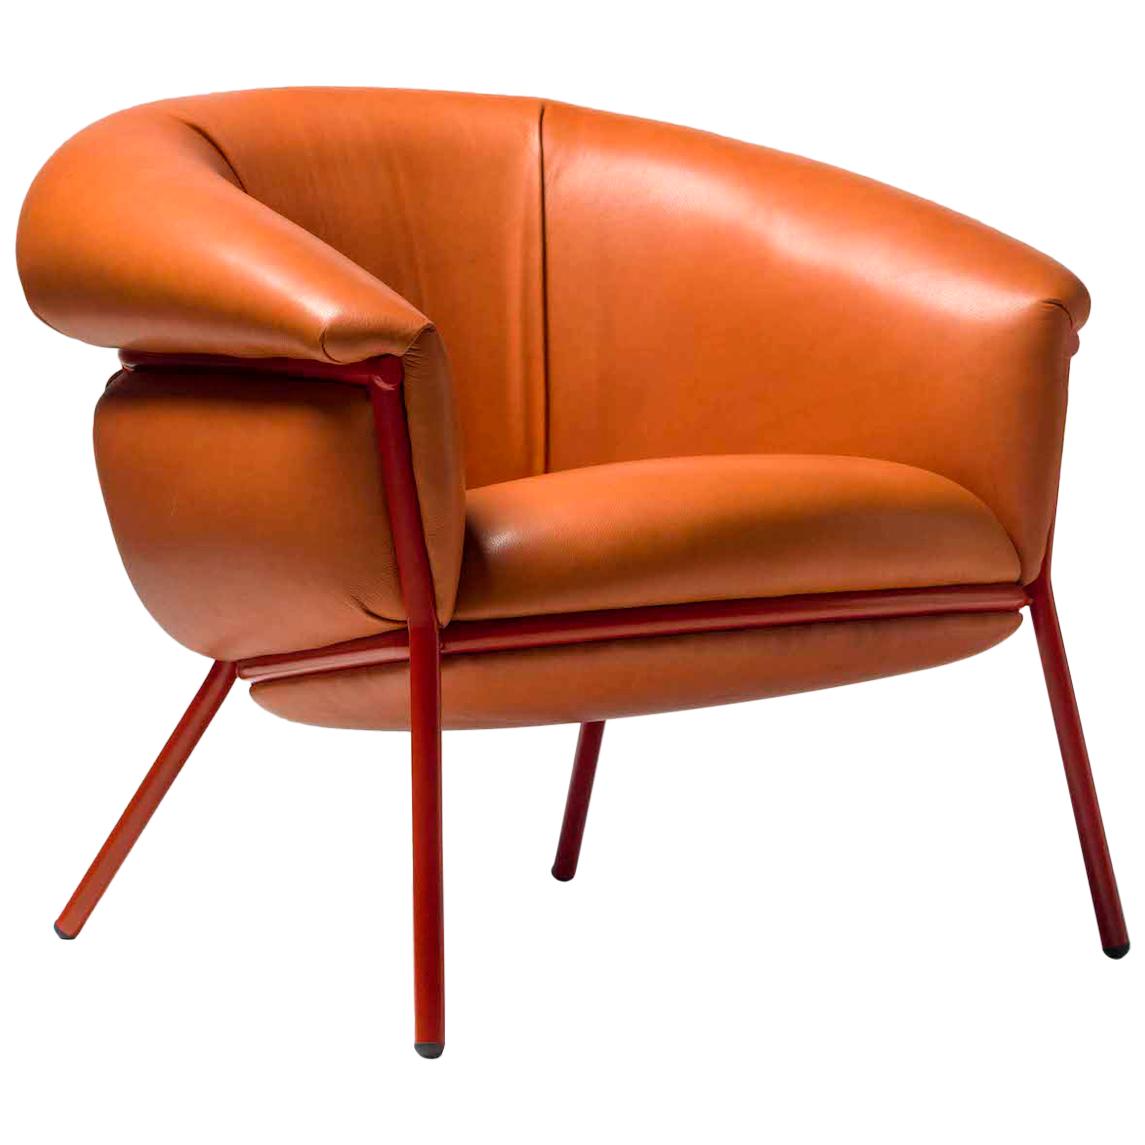 Grasso Armchair in Orange Leather by BD Barcelona